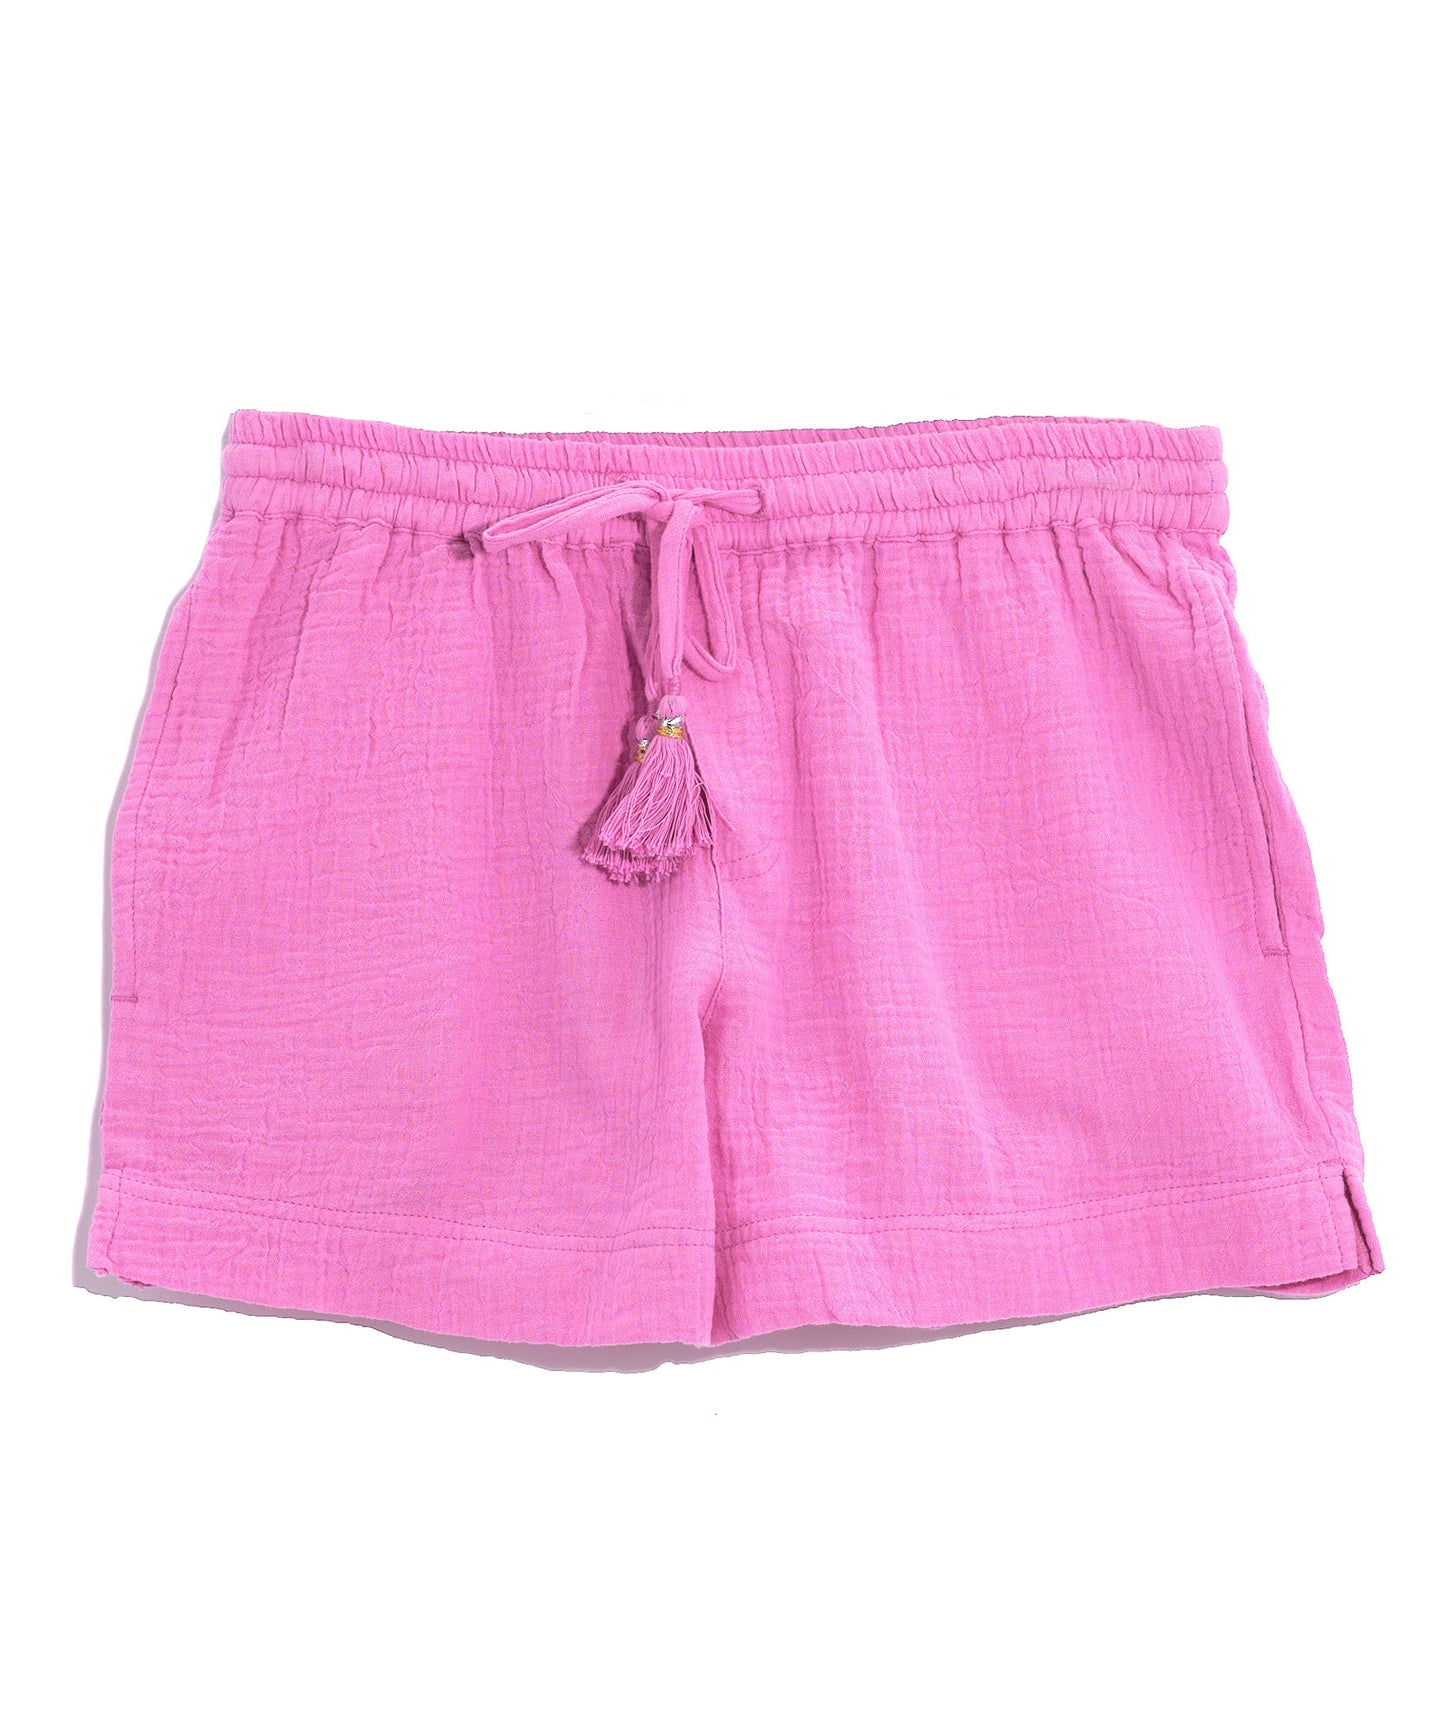 Supersoft Gauze Beach Shorts in color Cyclamen